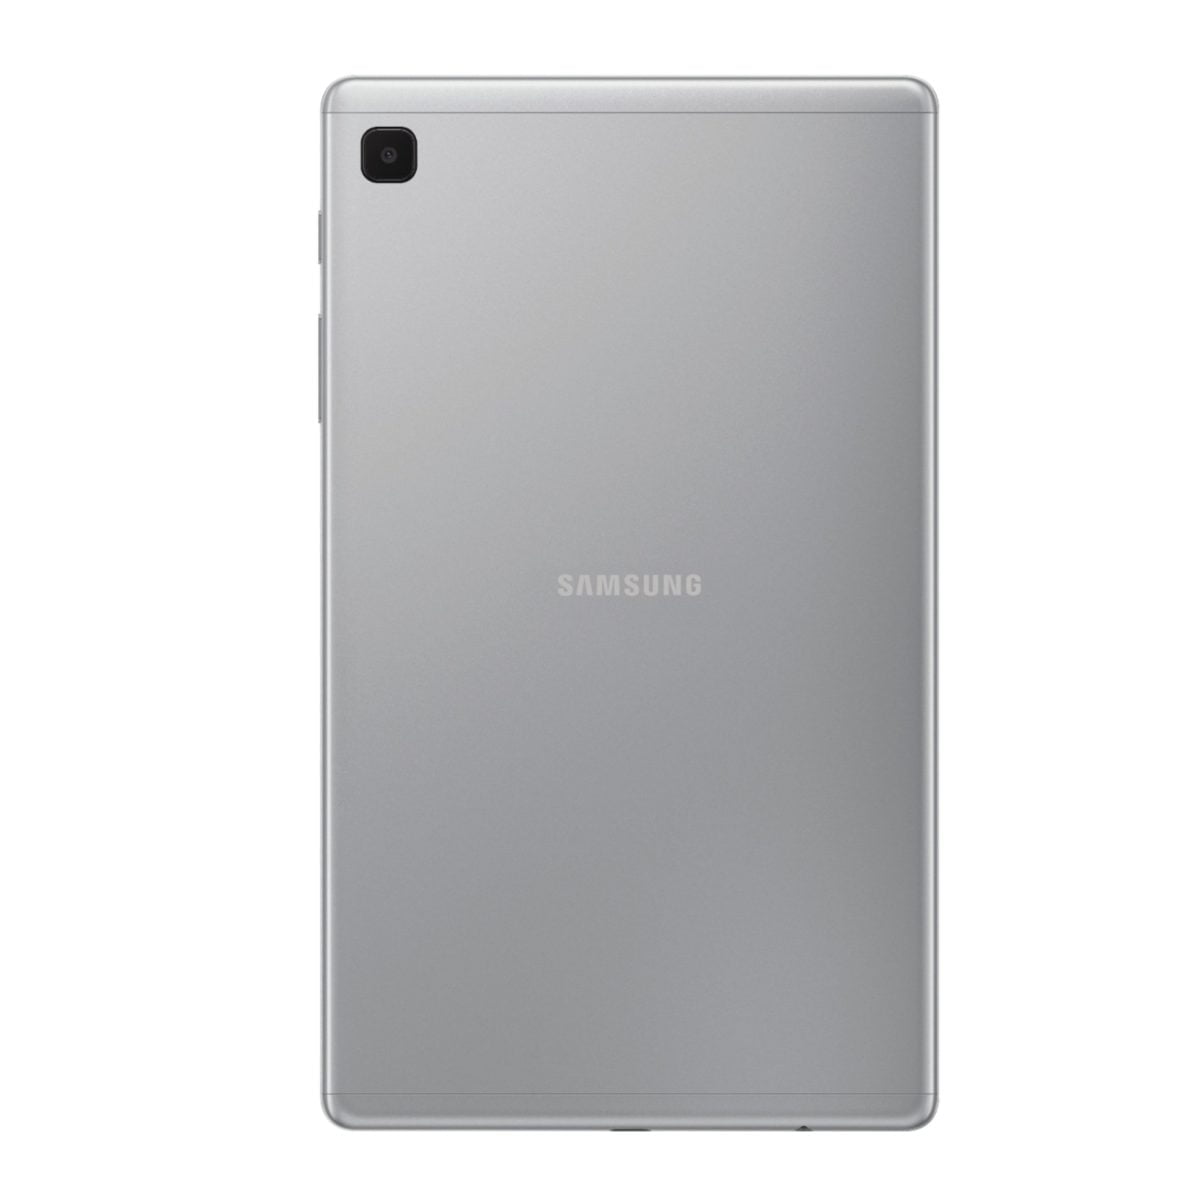 6464588Cv11D Scaled Samsung &Lt;H1&Gt;Samsung Galaxy Tab A7 Lite 32Gb - ‎Silver&Lt;/H1&Gt; Meet The Device Your Whole Family Will Love: Samsung Galaxy Tab A7 Lite, The Tablet That'S Made To Be Shared. With Its Compact 8.7&Quot; Screen, Galaxy Tab A7 Lite Is Perfectly Sized For Entertainment On The Go. Its Sturdy Metal Frame Is Built To Be Brought Along From The Living Room To Your Beach Vacation, Or Wherever You Want To Take It. Galaxy Tab A7 Lite Comes With Access To Hours Of Ad-Free Youtube Premium And Samsung Tv At No Extra Charge So You Can Keep The Family Happy Without Annoying Interruptions. Plus, With A Powerful Processor For Fast Streaming And Plenty Of Storage For Your Favorite Files, Galaxy Tab A7 Lite Simplifies Entertainment Needs For Everyone Under Your Roof. Samsung Galaxy Tab Samsung Galaxy Tab A7 Lite 32Gb Cellular - Silver